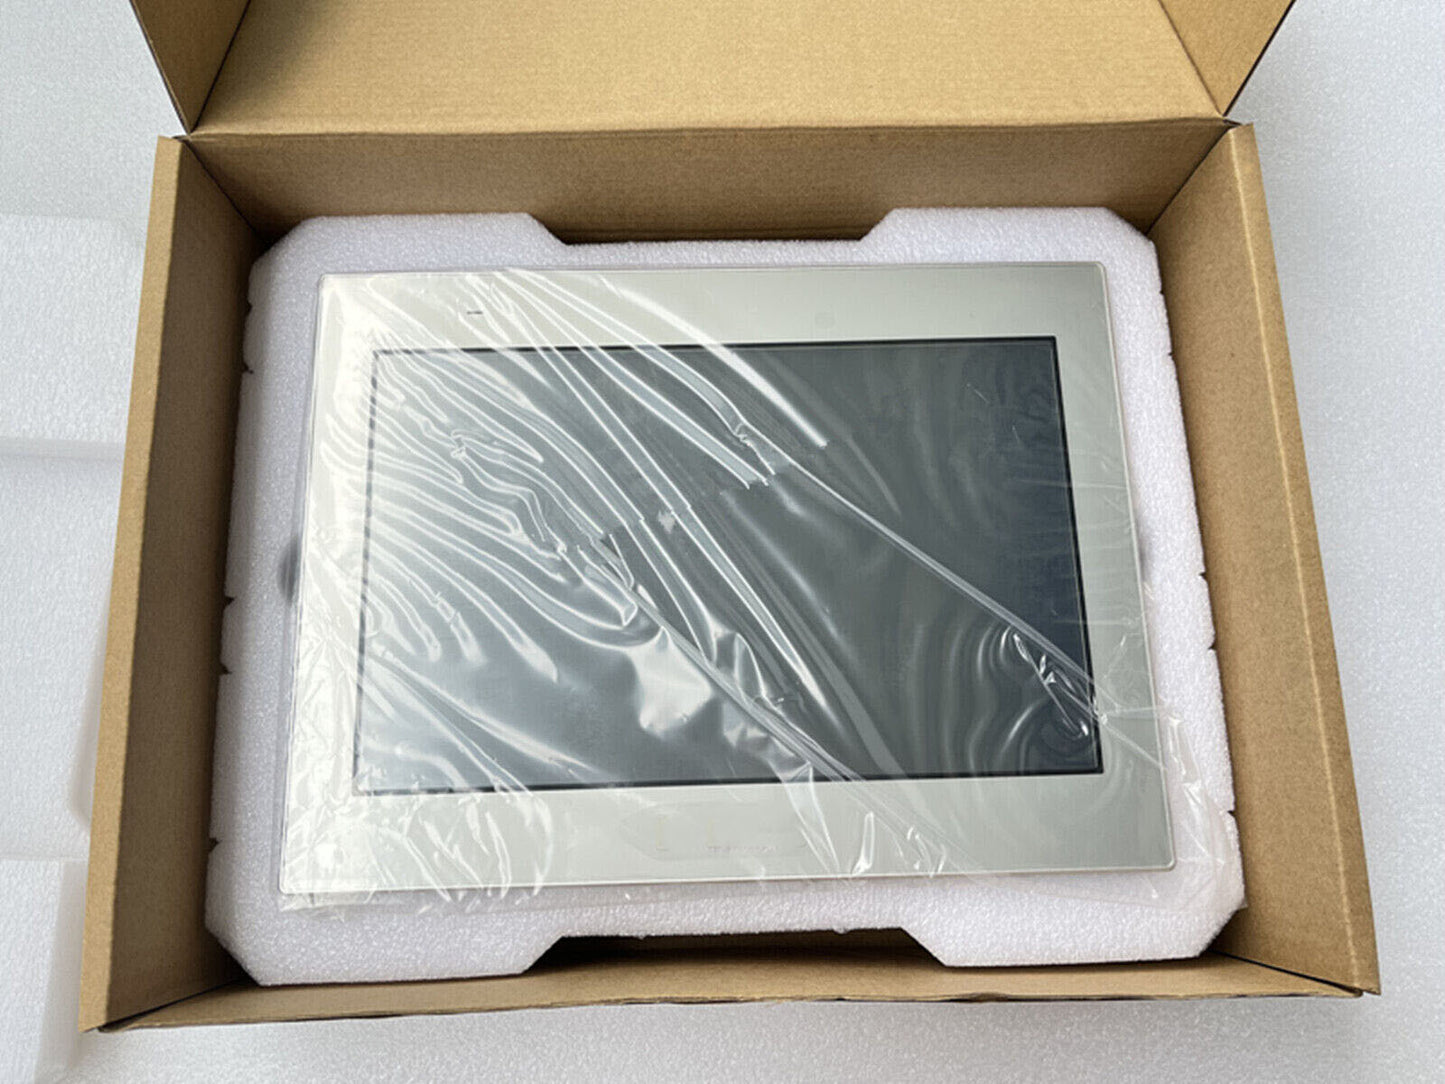 New Pro-face PFXST6600WAD Touch Screen Fast Ship